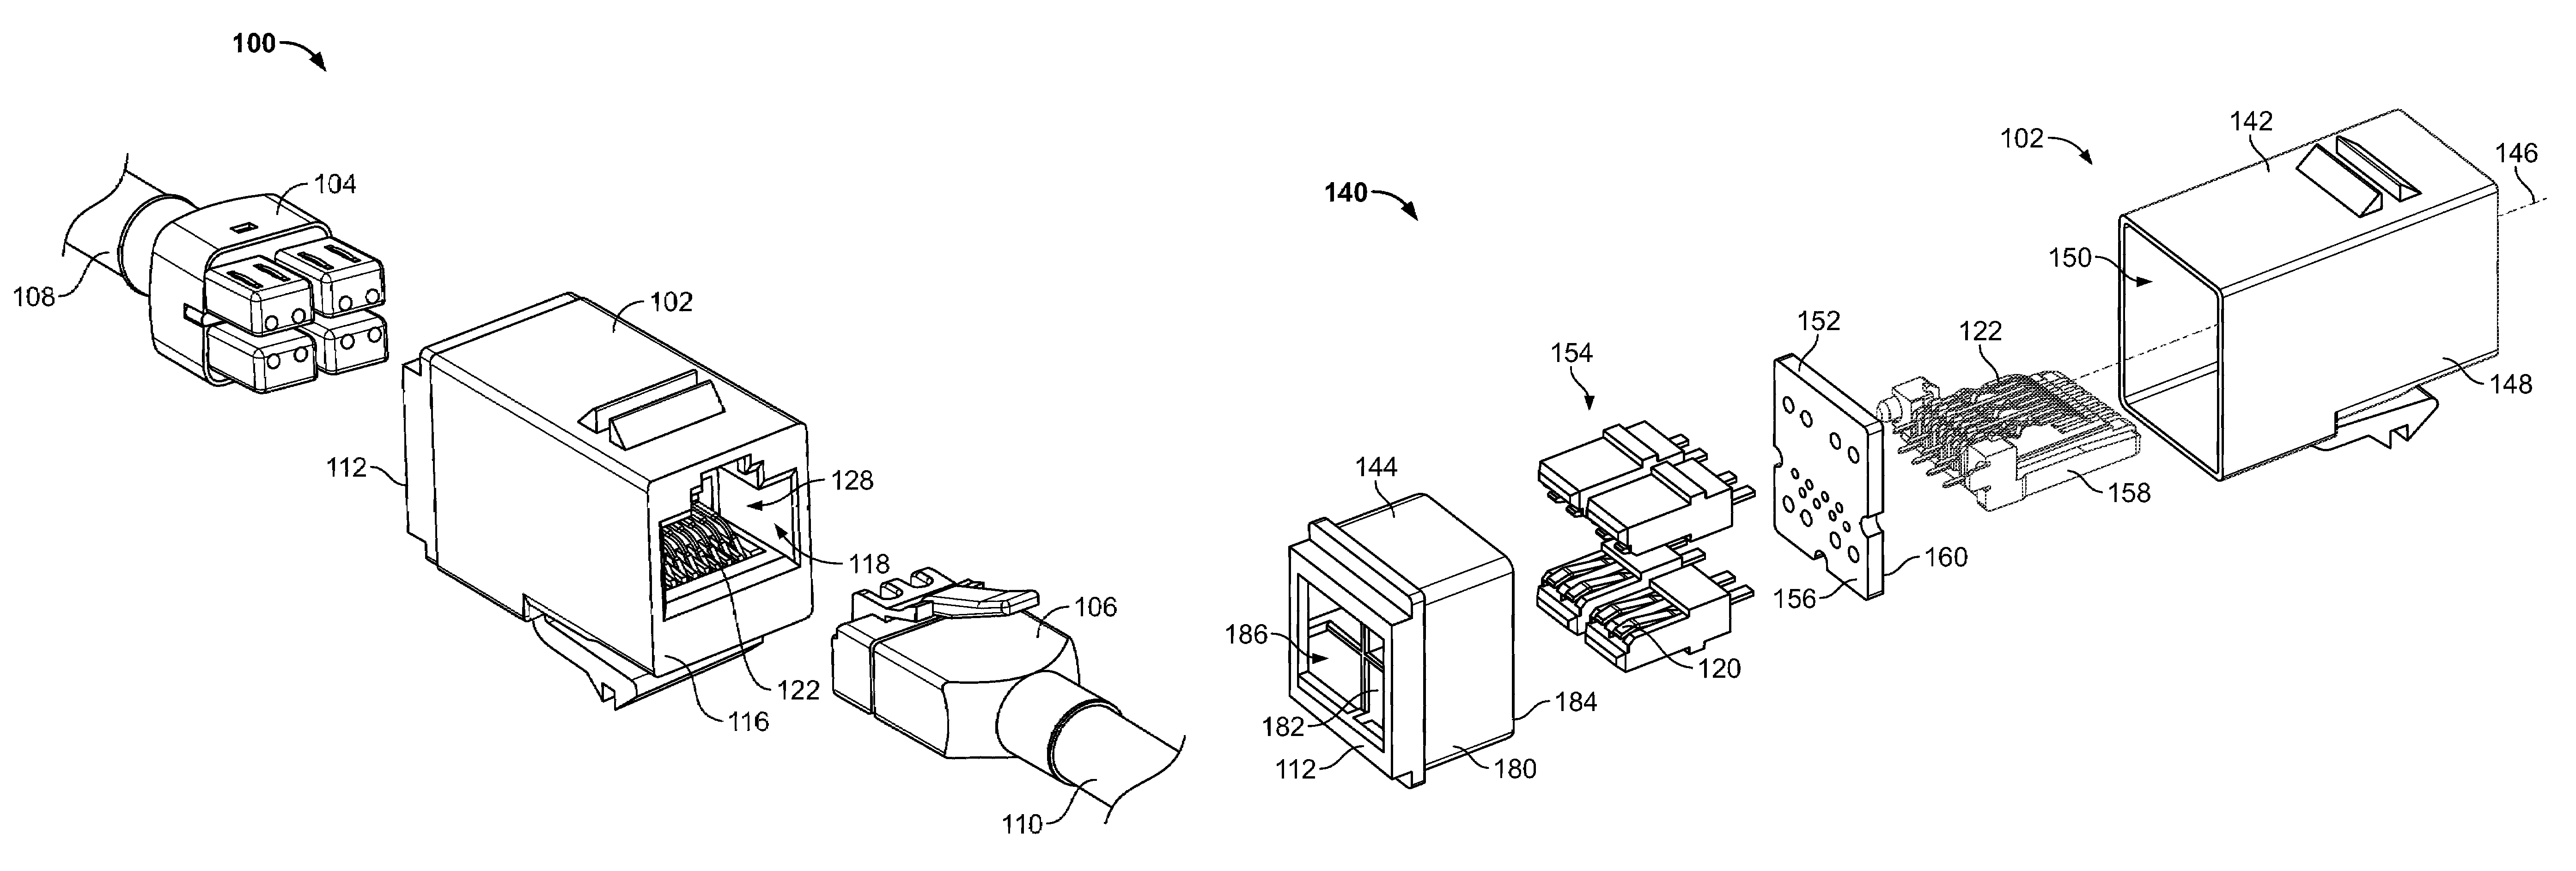 Coupler for interconnecting electrical connectors